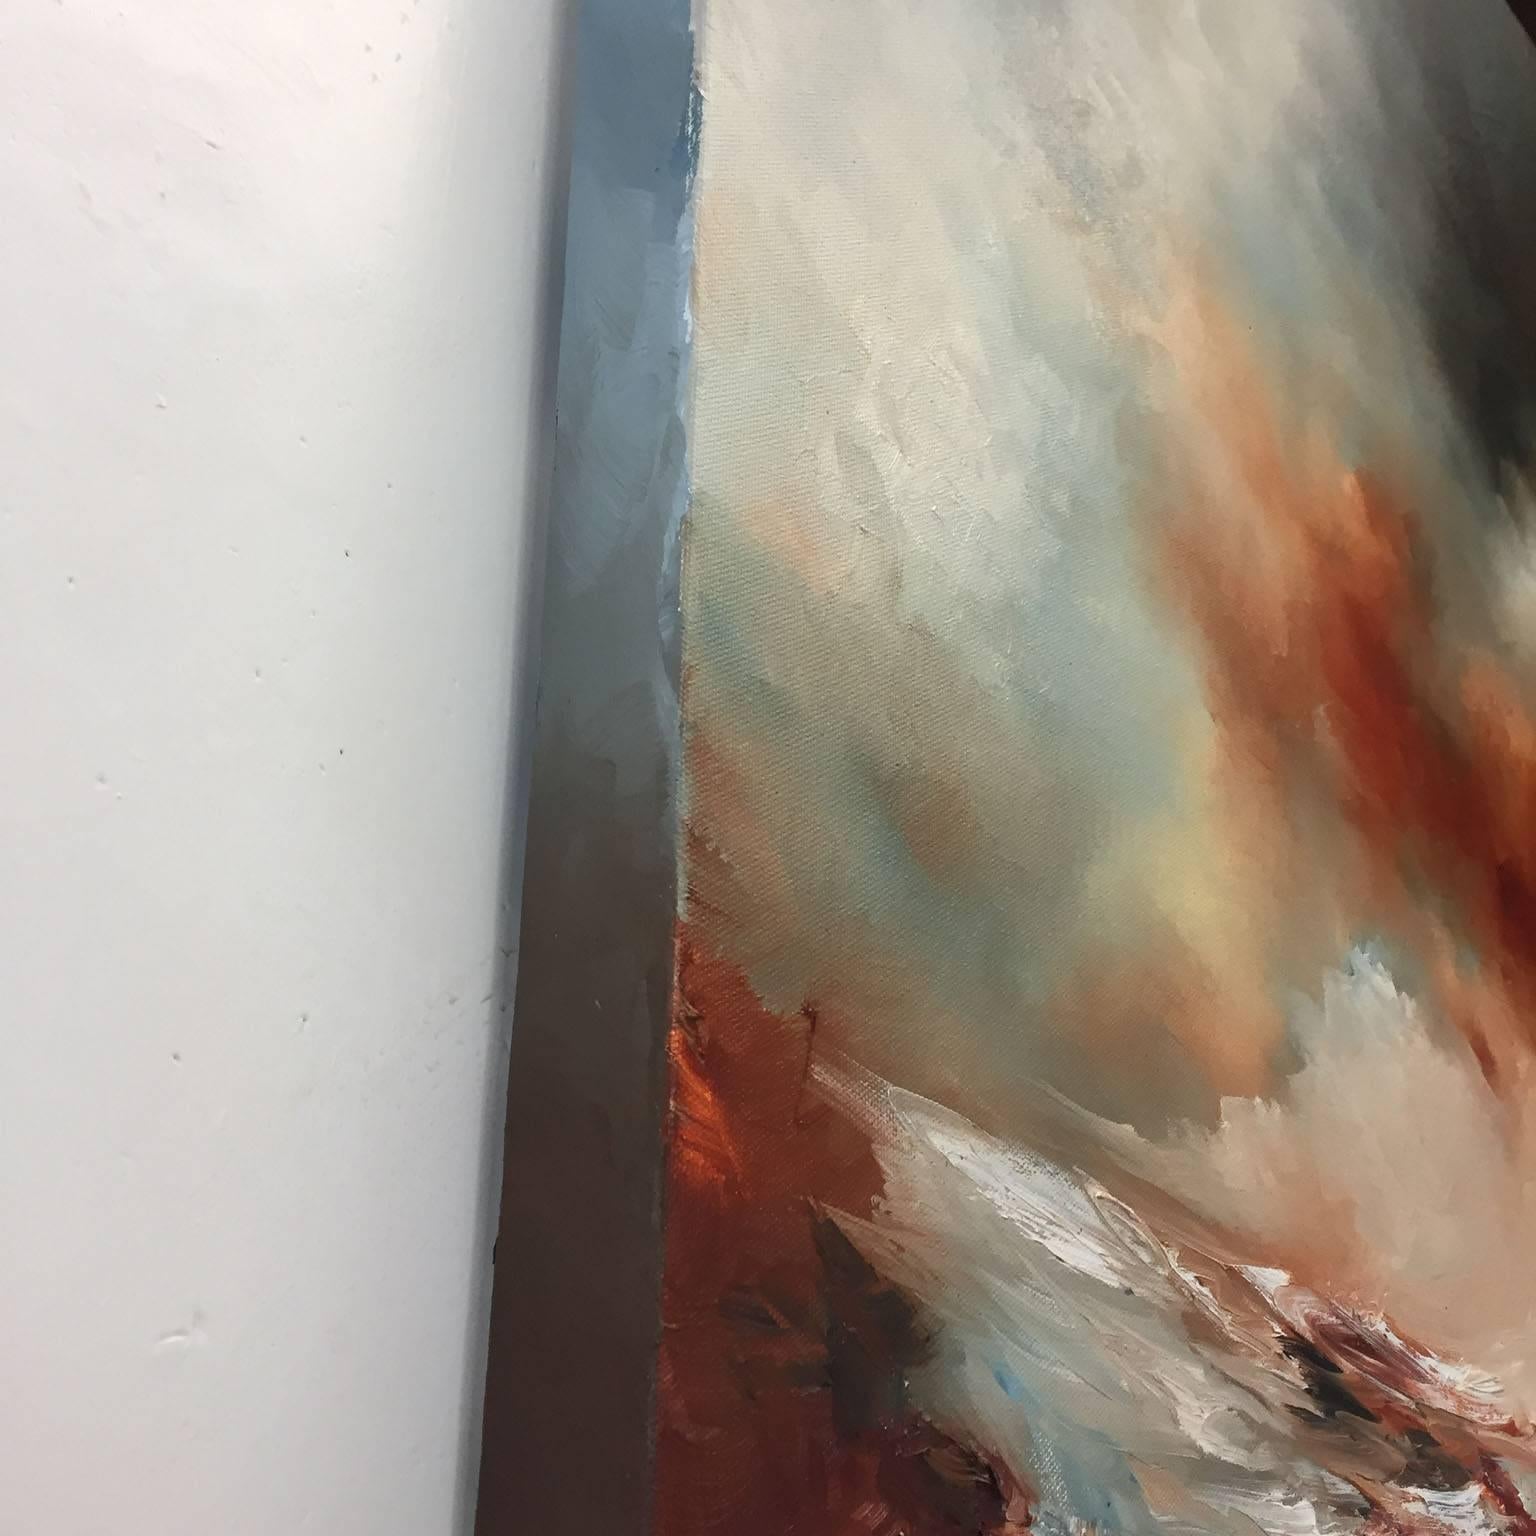 ‘Heat Smoulder.’
An original oil painting by Alison Johnson inspired by the colour, drama and atmosphere of the sea and weather.
Medium: Oil on Canvas
Colours: Orange, black and blue… dark colours have been used in this atmospheric seascape